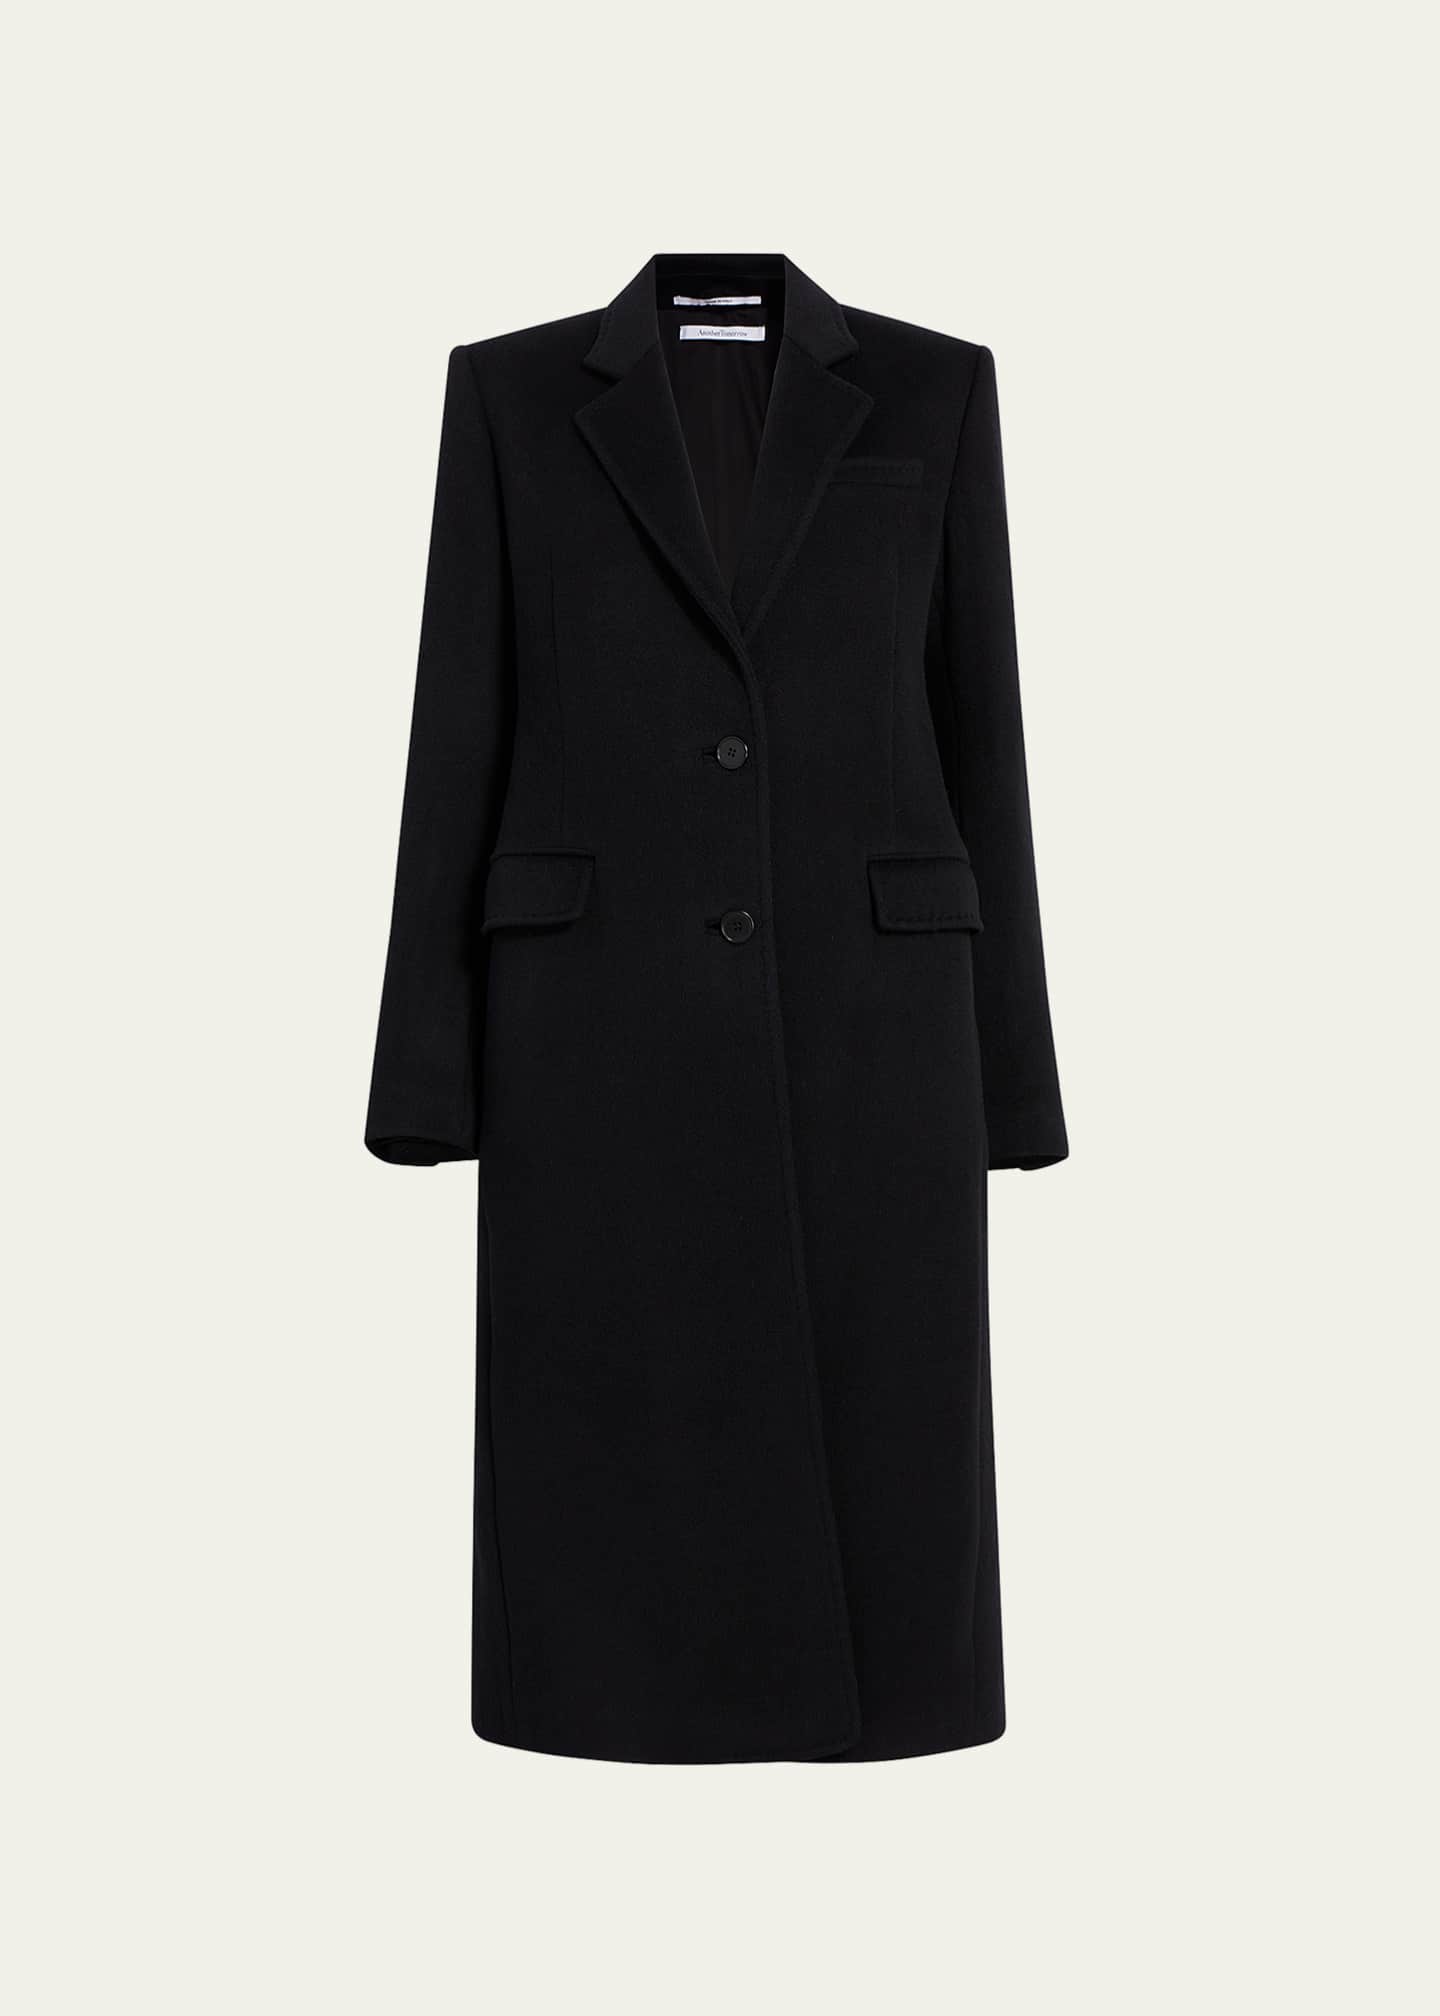 Another Tomorrow Cashmere Blend Tailored Peacoat - Bergdorf Goodman